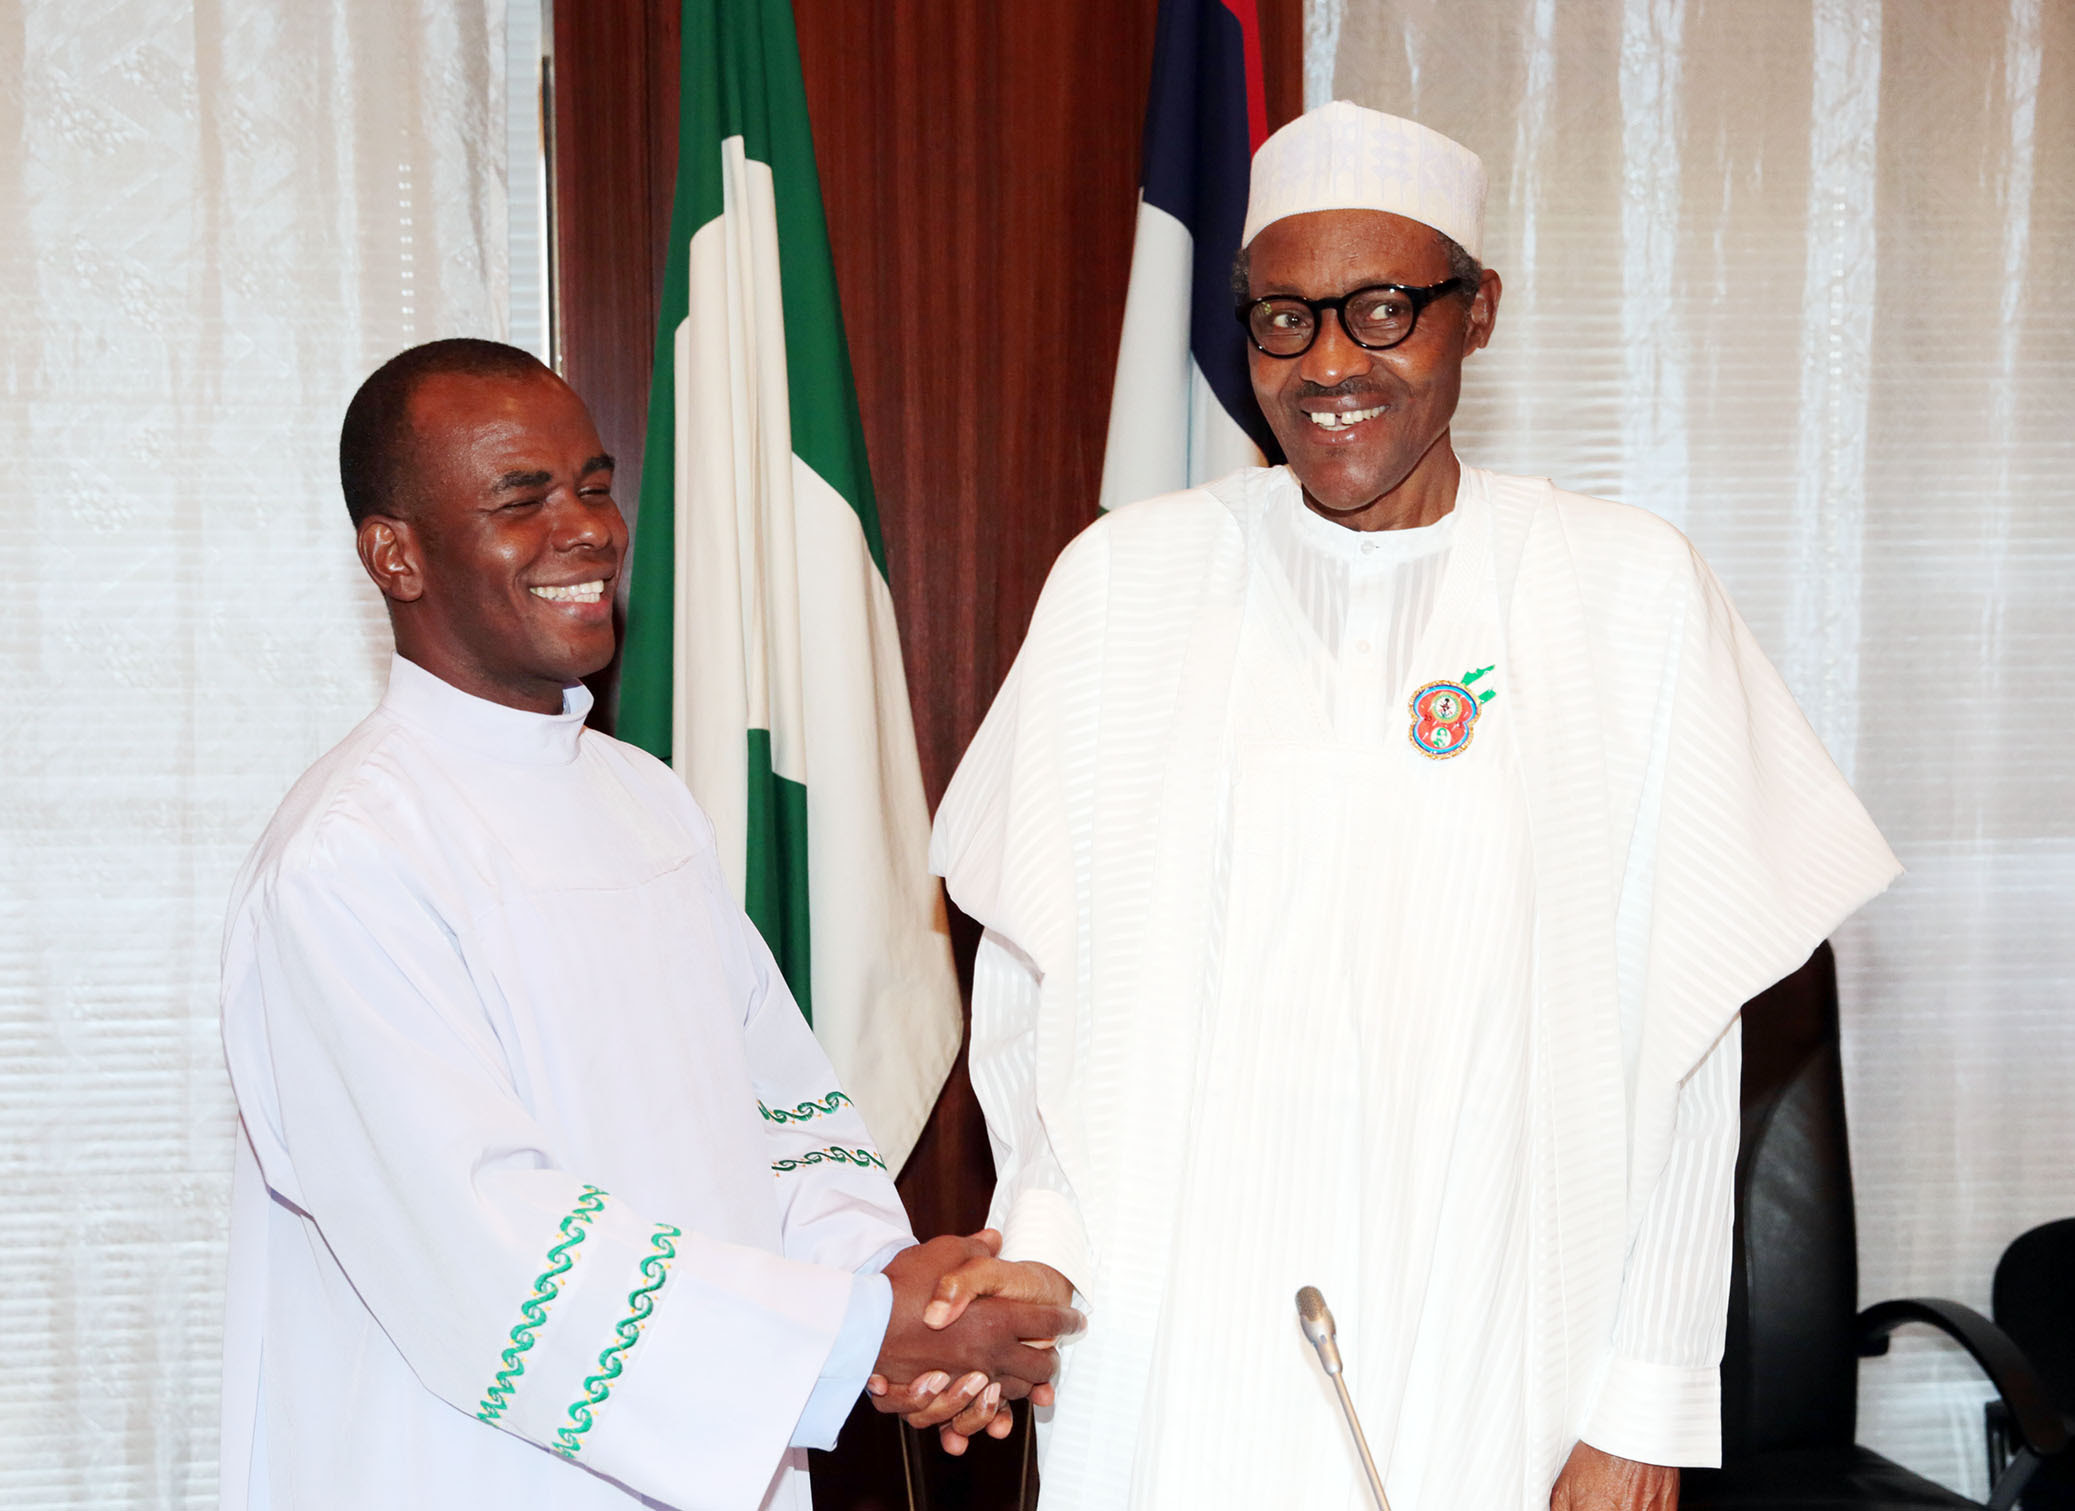 Mbaka: People want to put me at loggerheads with president